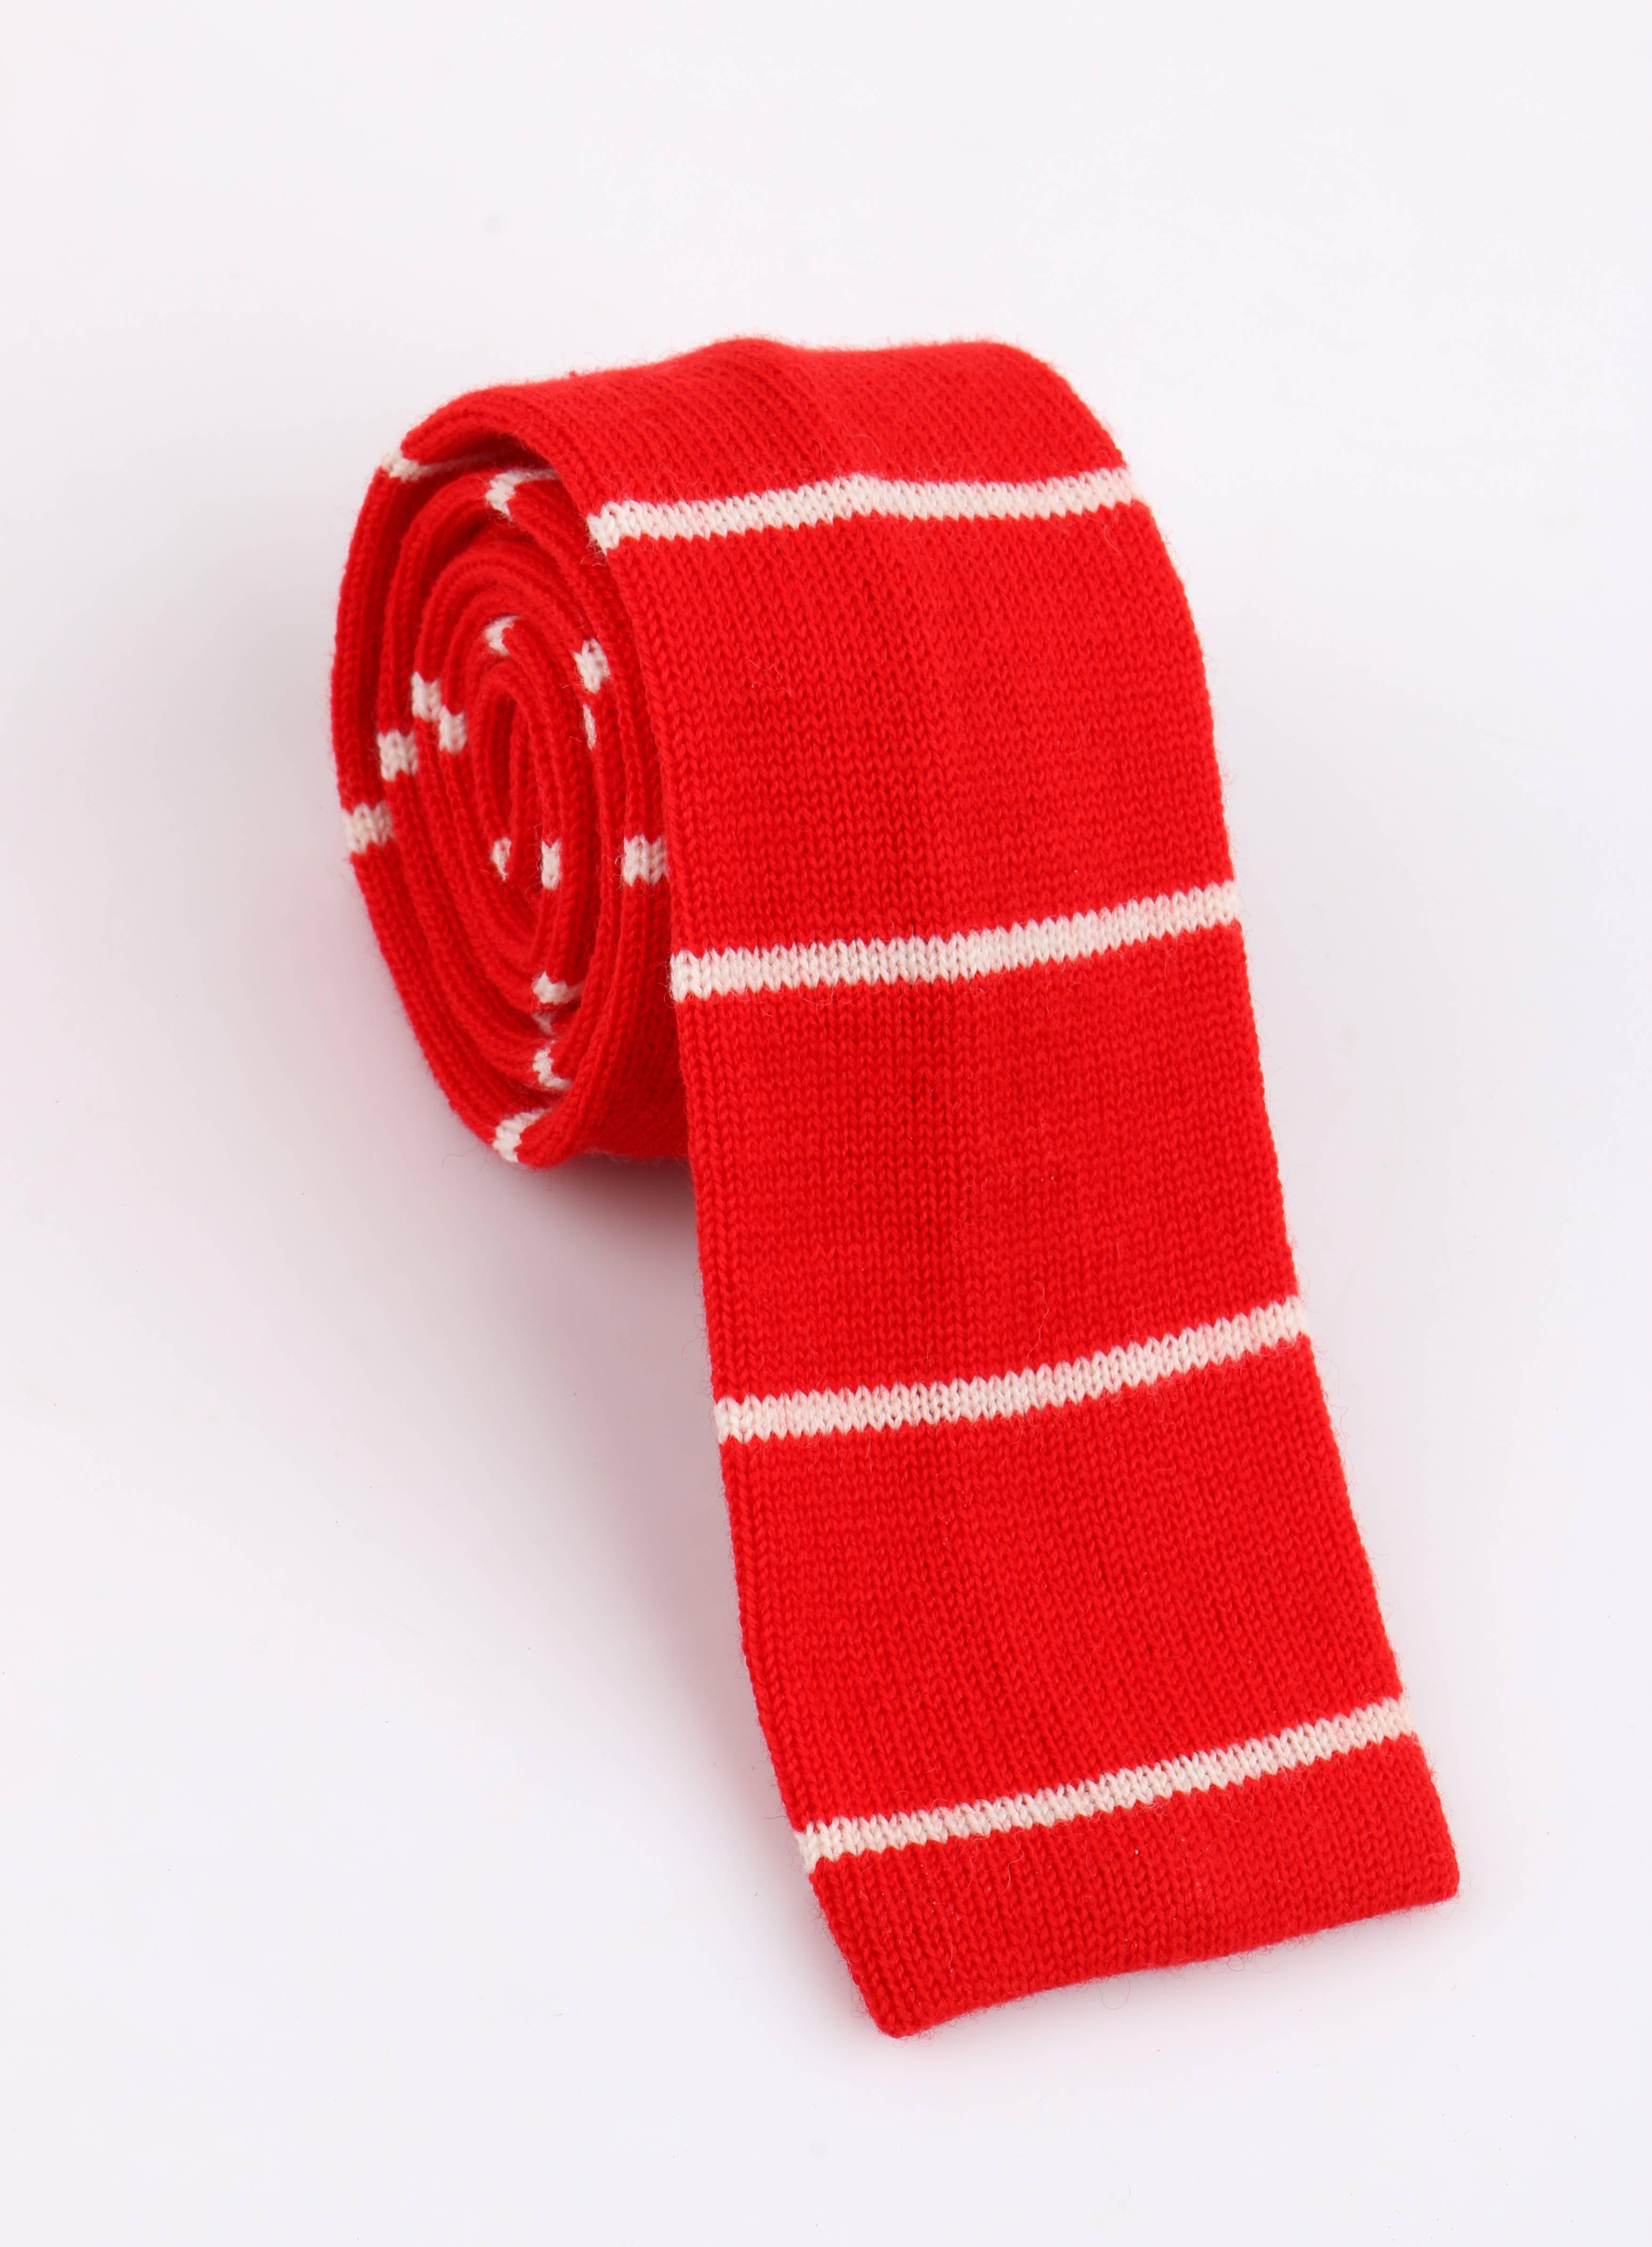 Vintage Gucci c.1980's red and off white striped wool knit necktie; New old stock. Red and off white horizontal striped knit. Square end. Marked Fabric Content: 